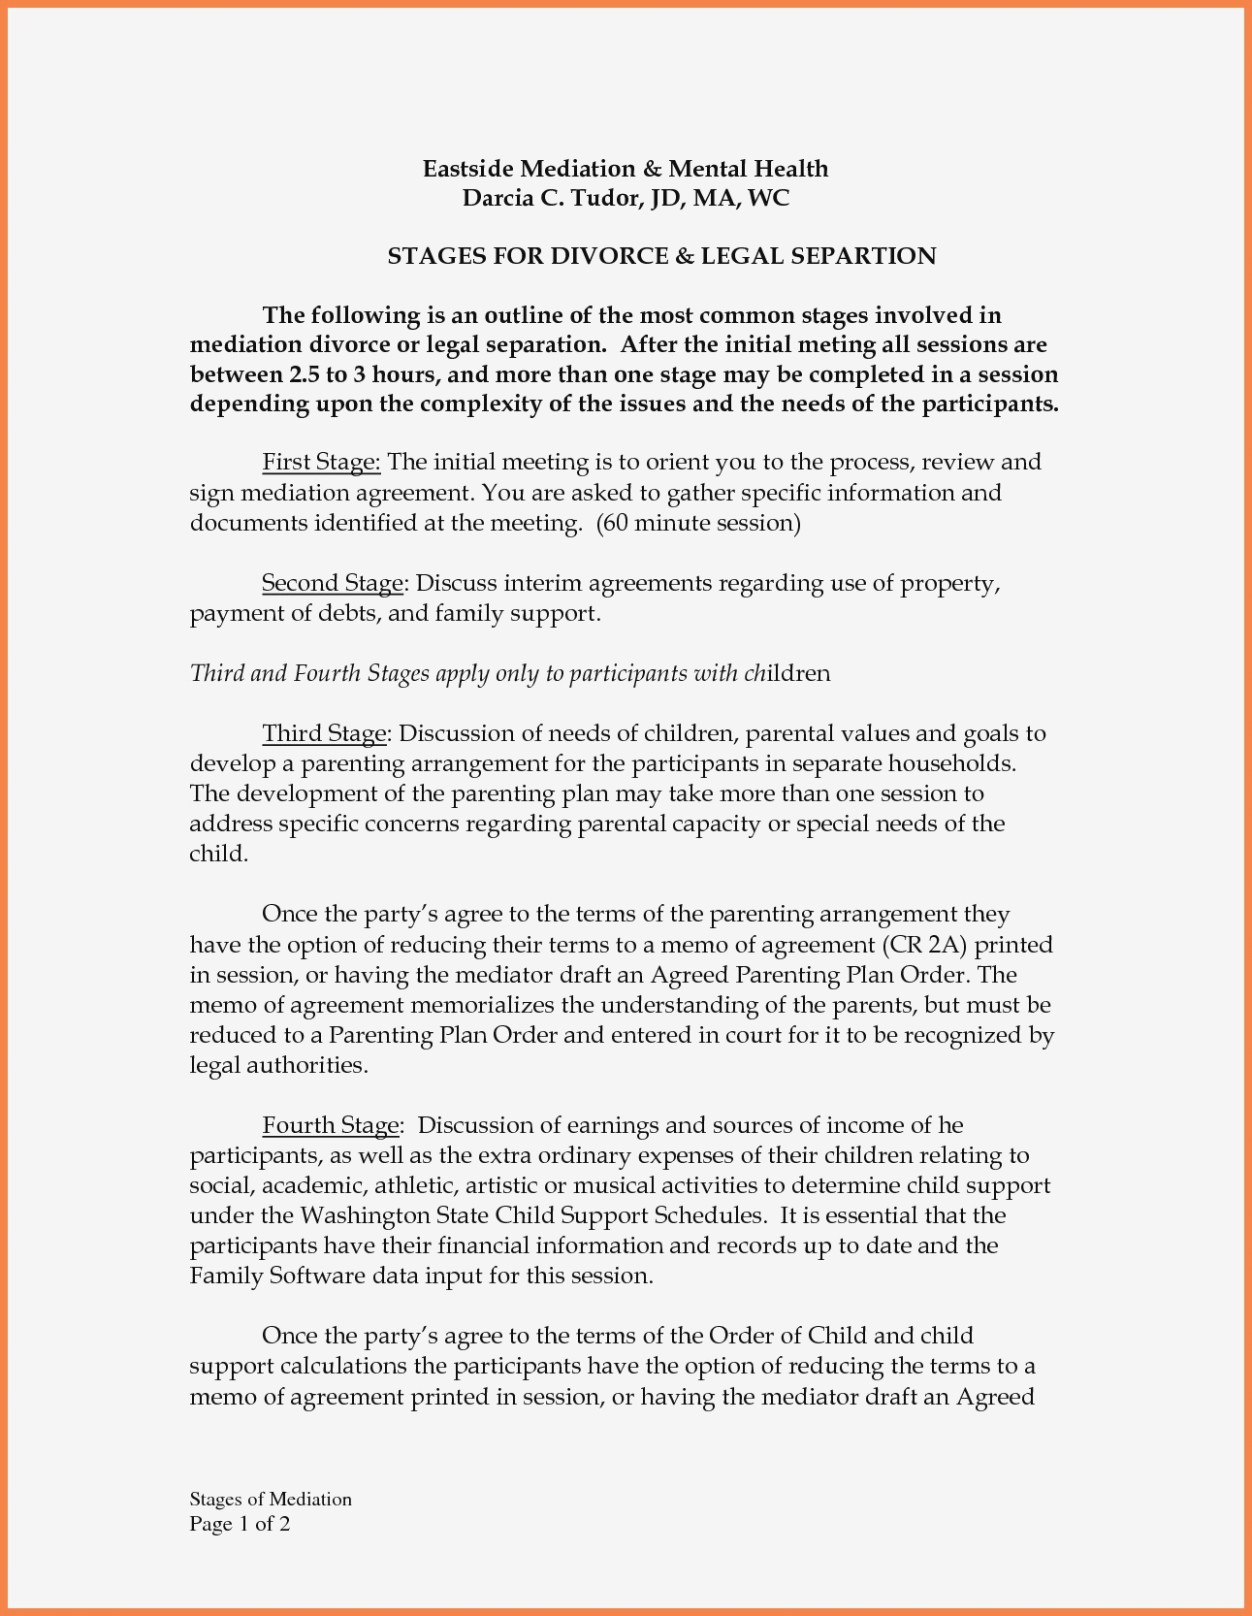 Texas Separate Property Agreement Form Ideal Divorce Mediation with Family Mediation Agreement Template